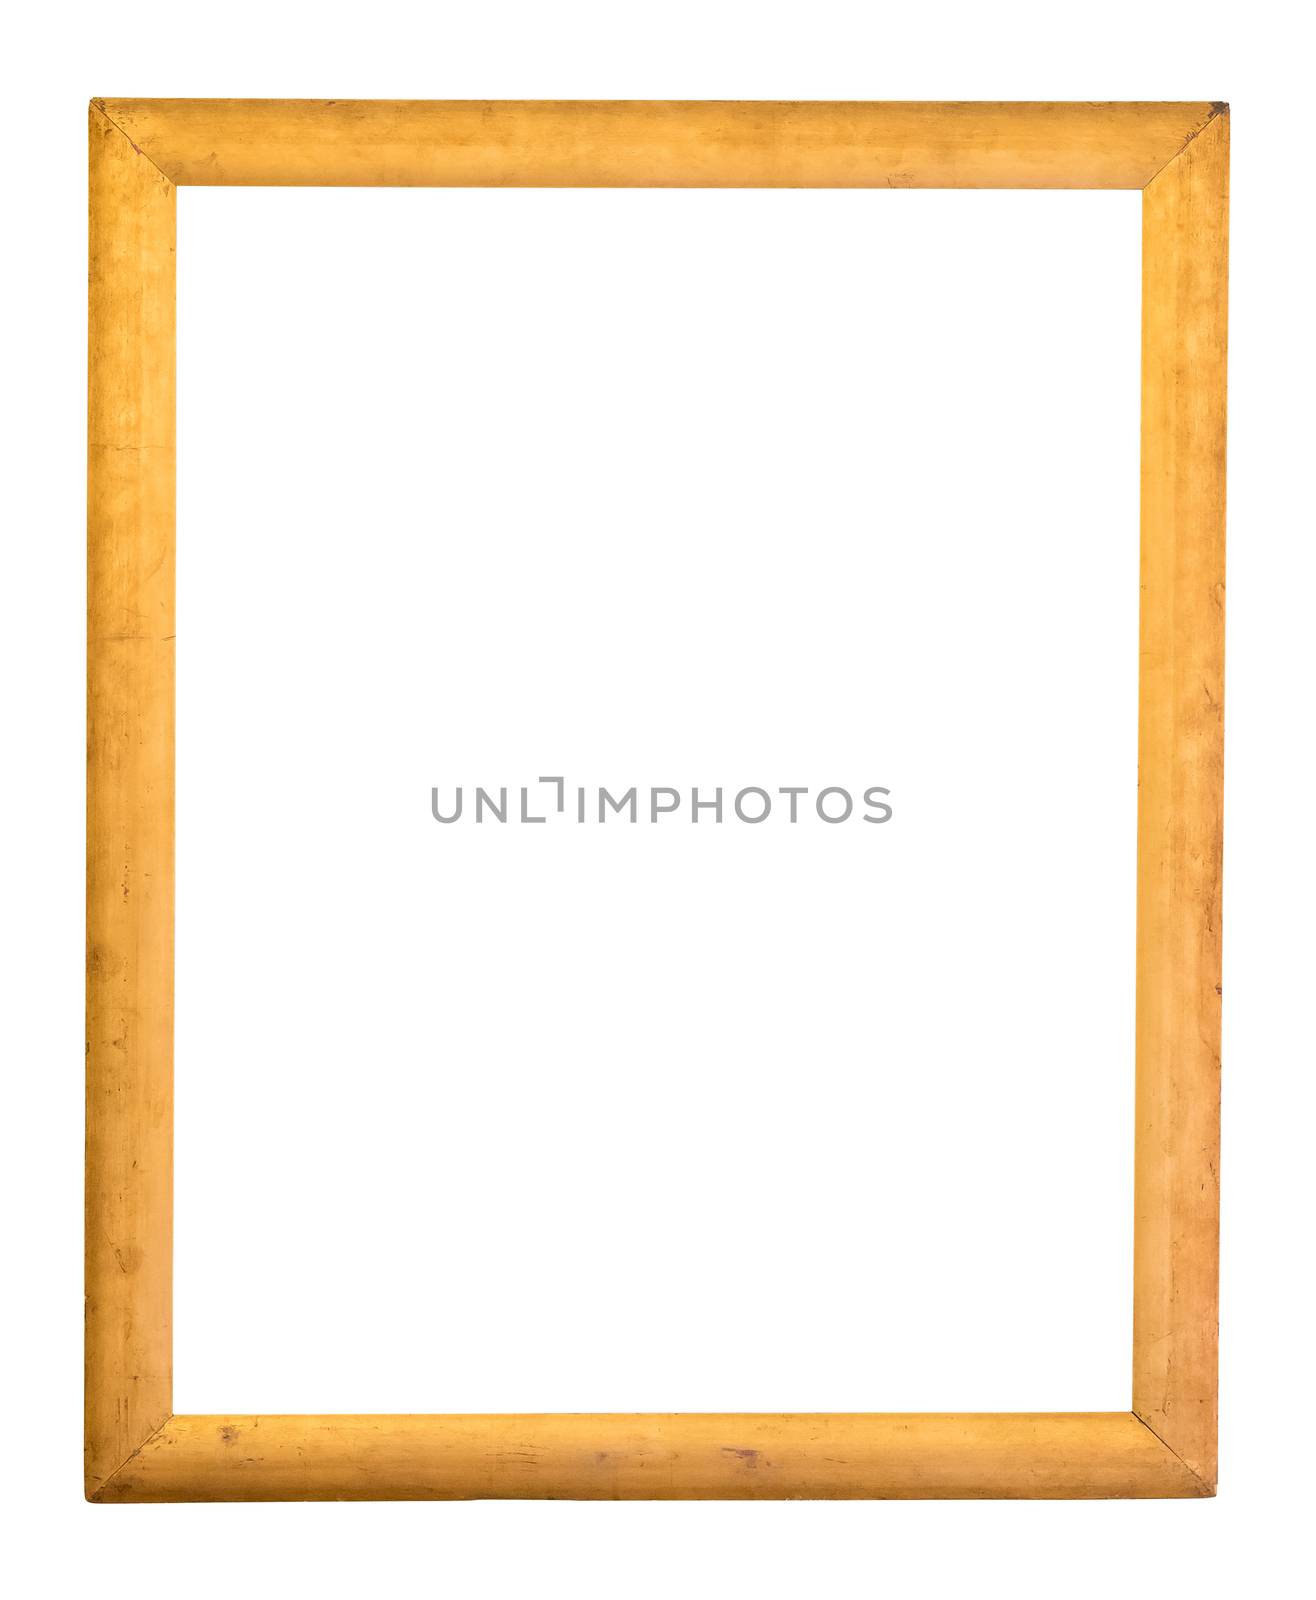 Rectangle decorative golden picture frame by mkos83